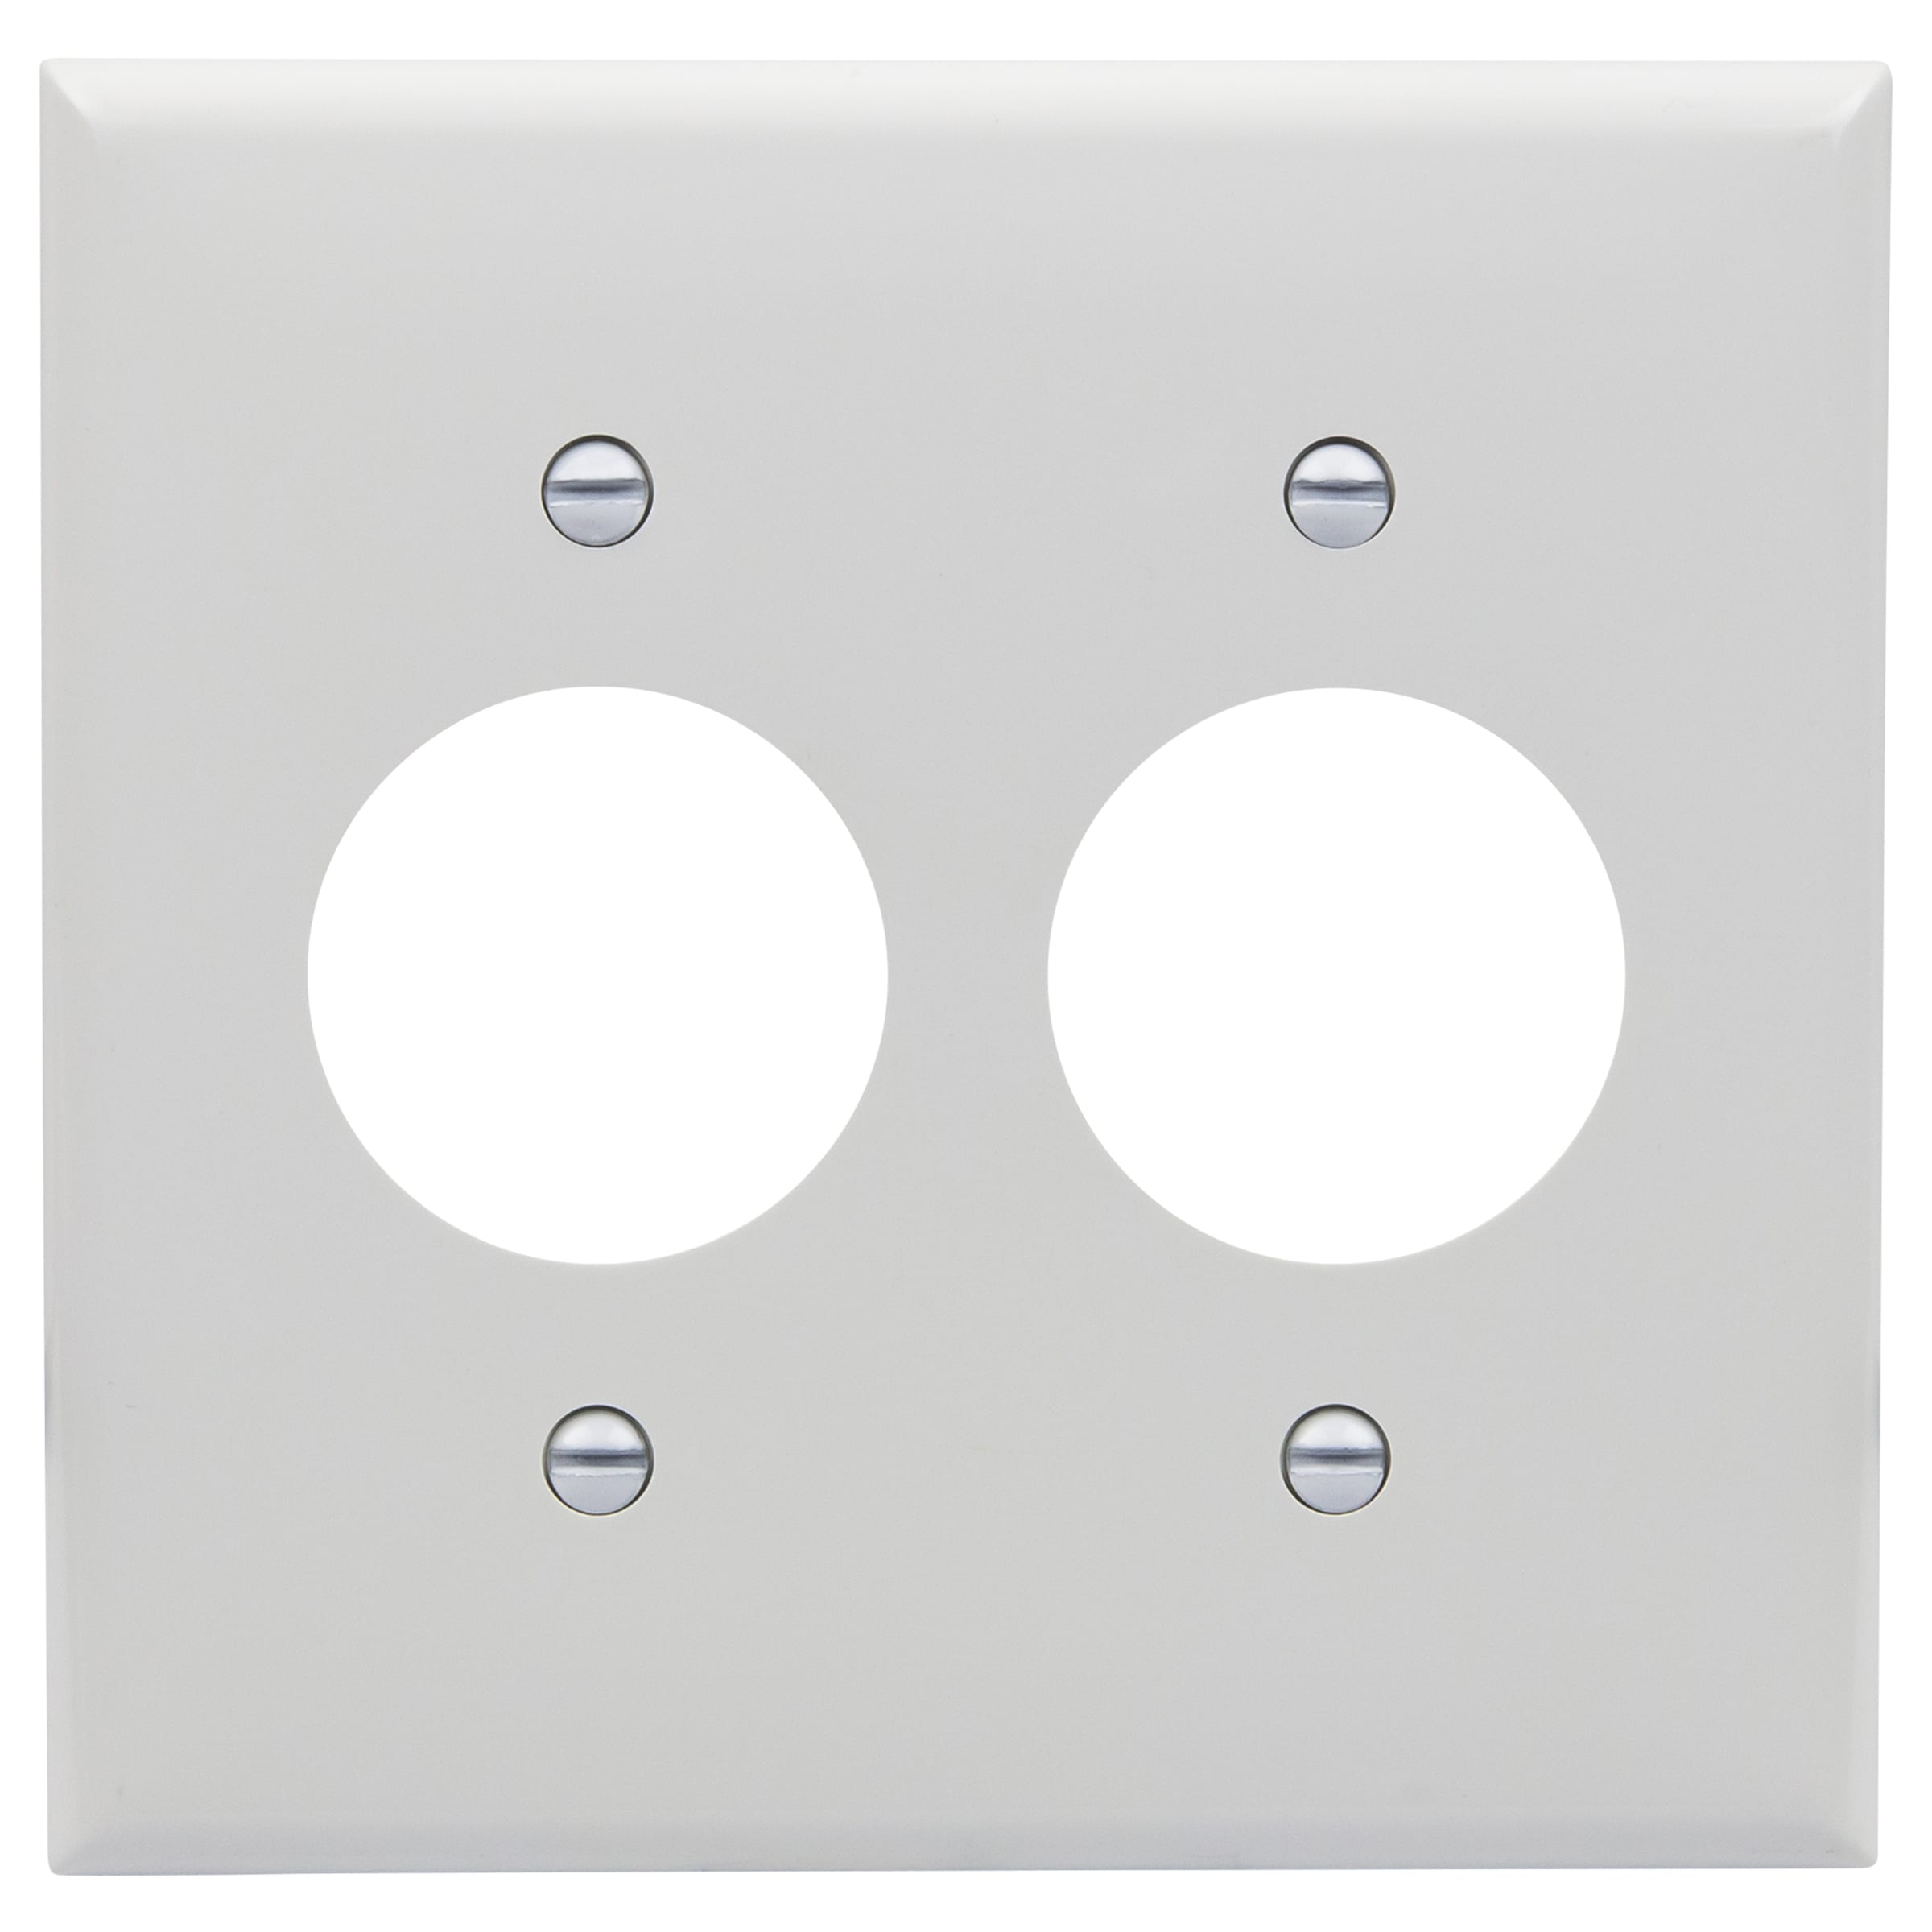 2-Gang Double 1.406" Hole Receptacle Wall Plate